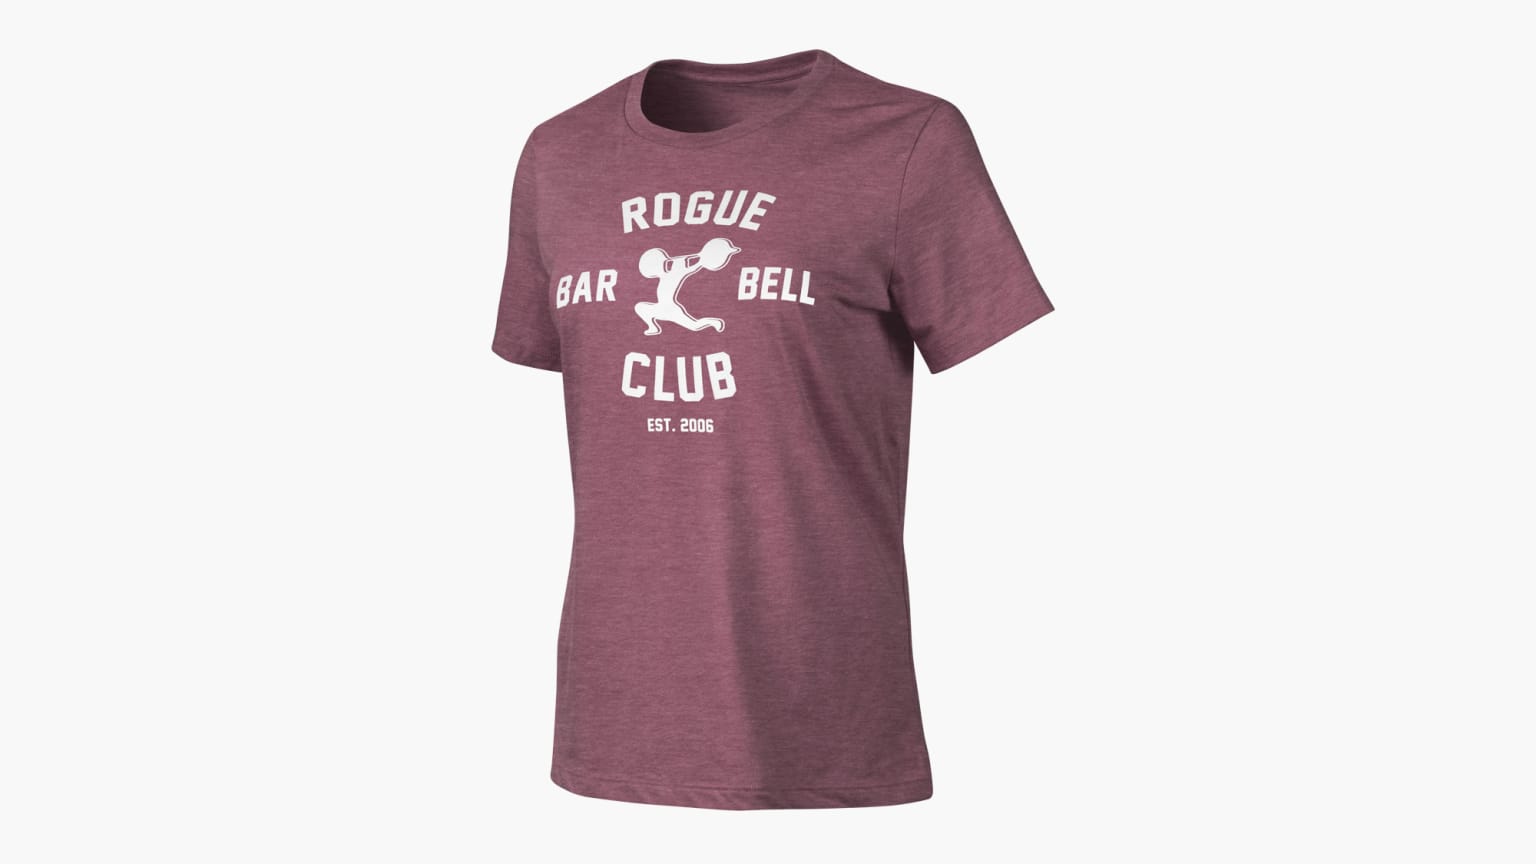 Rogue Women's Relaxed Barbell Club 2.0 T-Shirt - Heather Maroon / White - XL